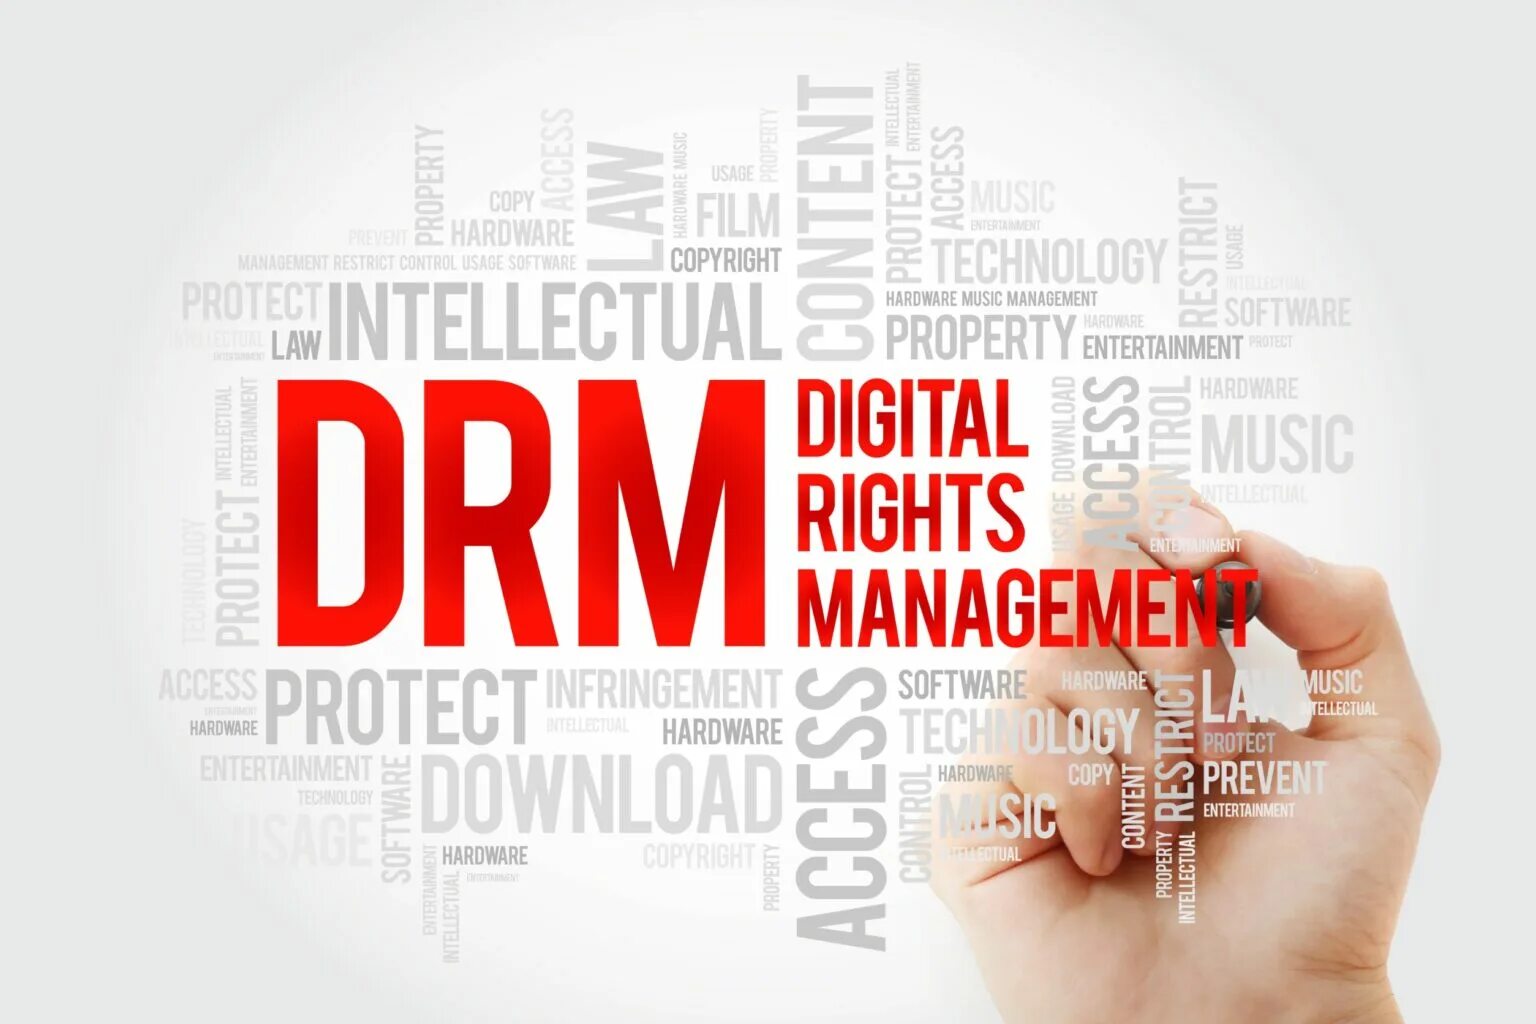 Digital rights Management. Digital rights. What is Digital rights. Digital rights photo. Right manager